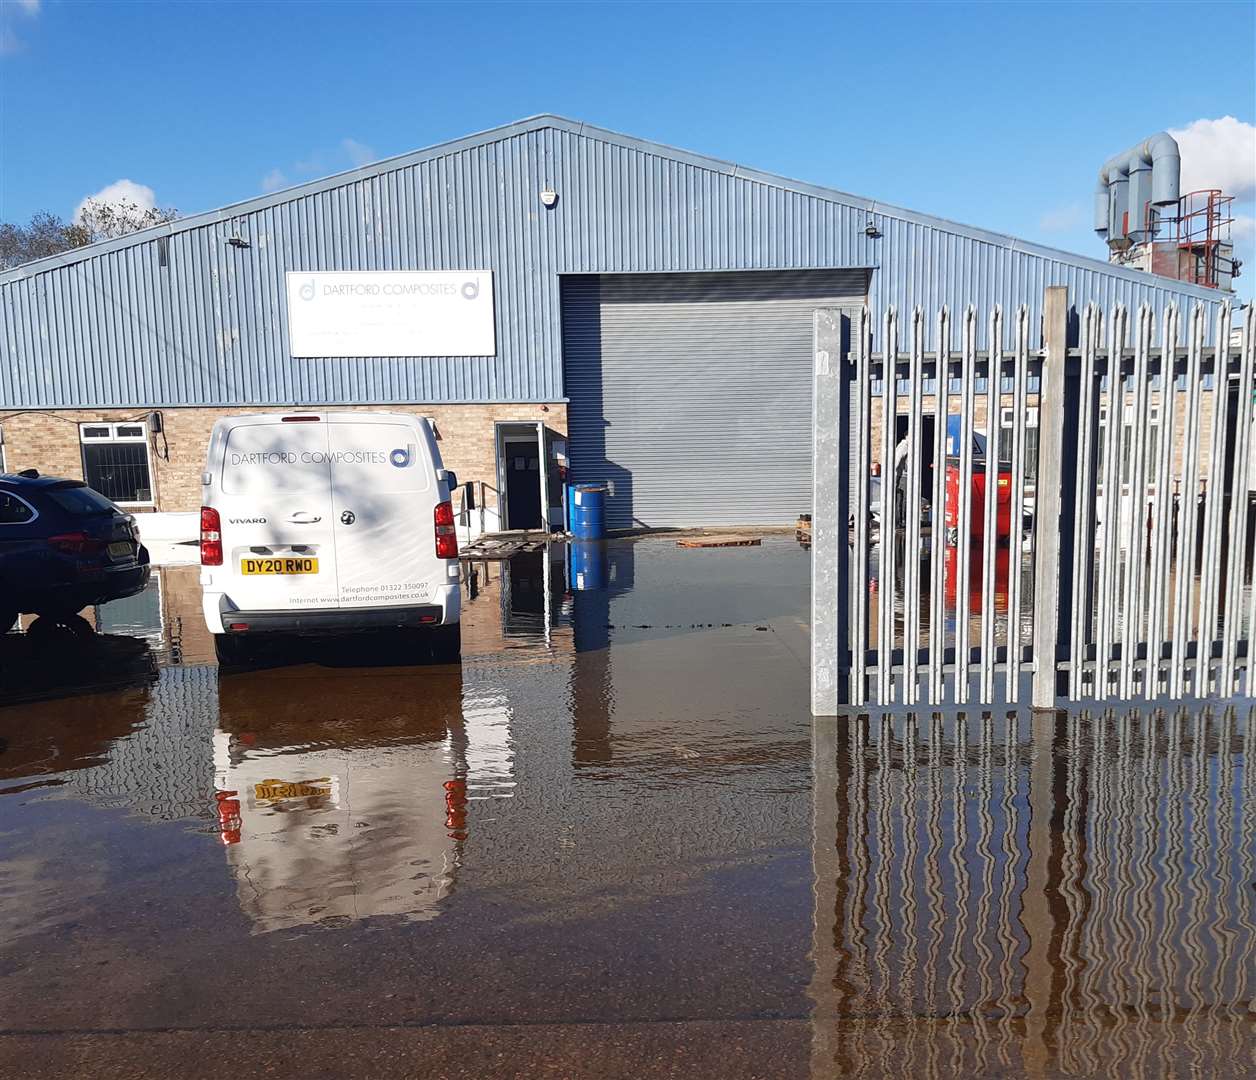 Dartford Composites may have to close if it cannot solve reoccurring flooding issues.